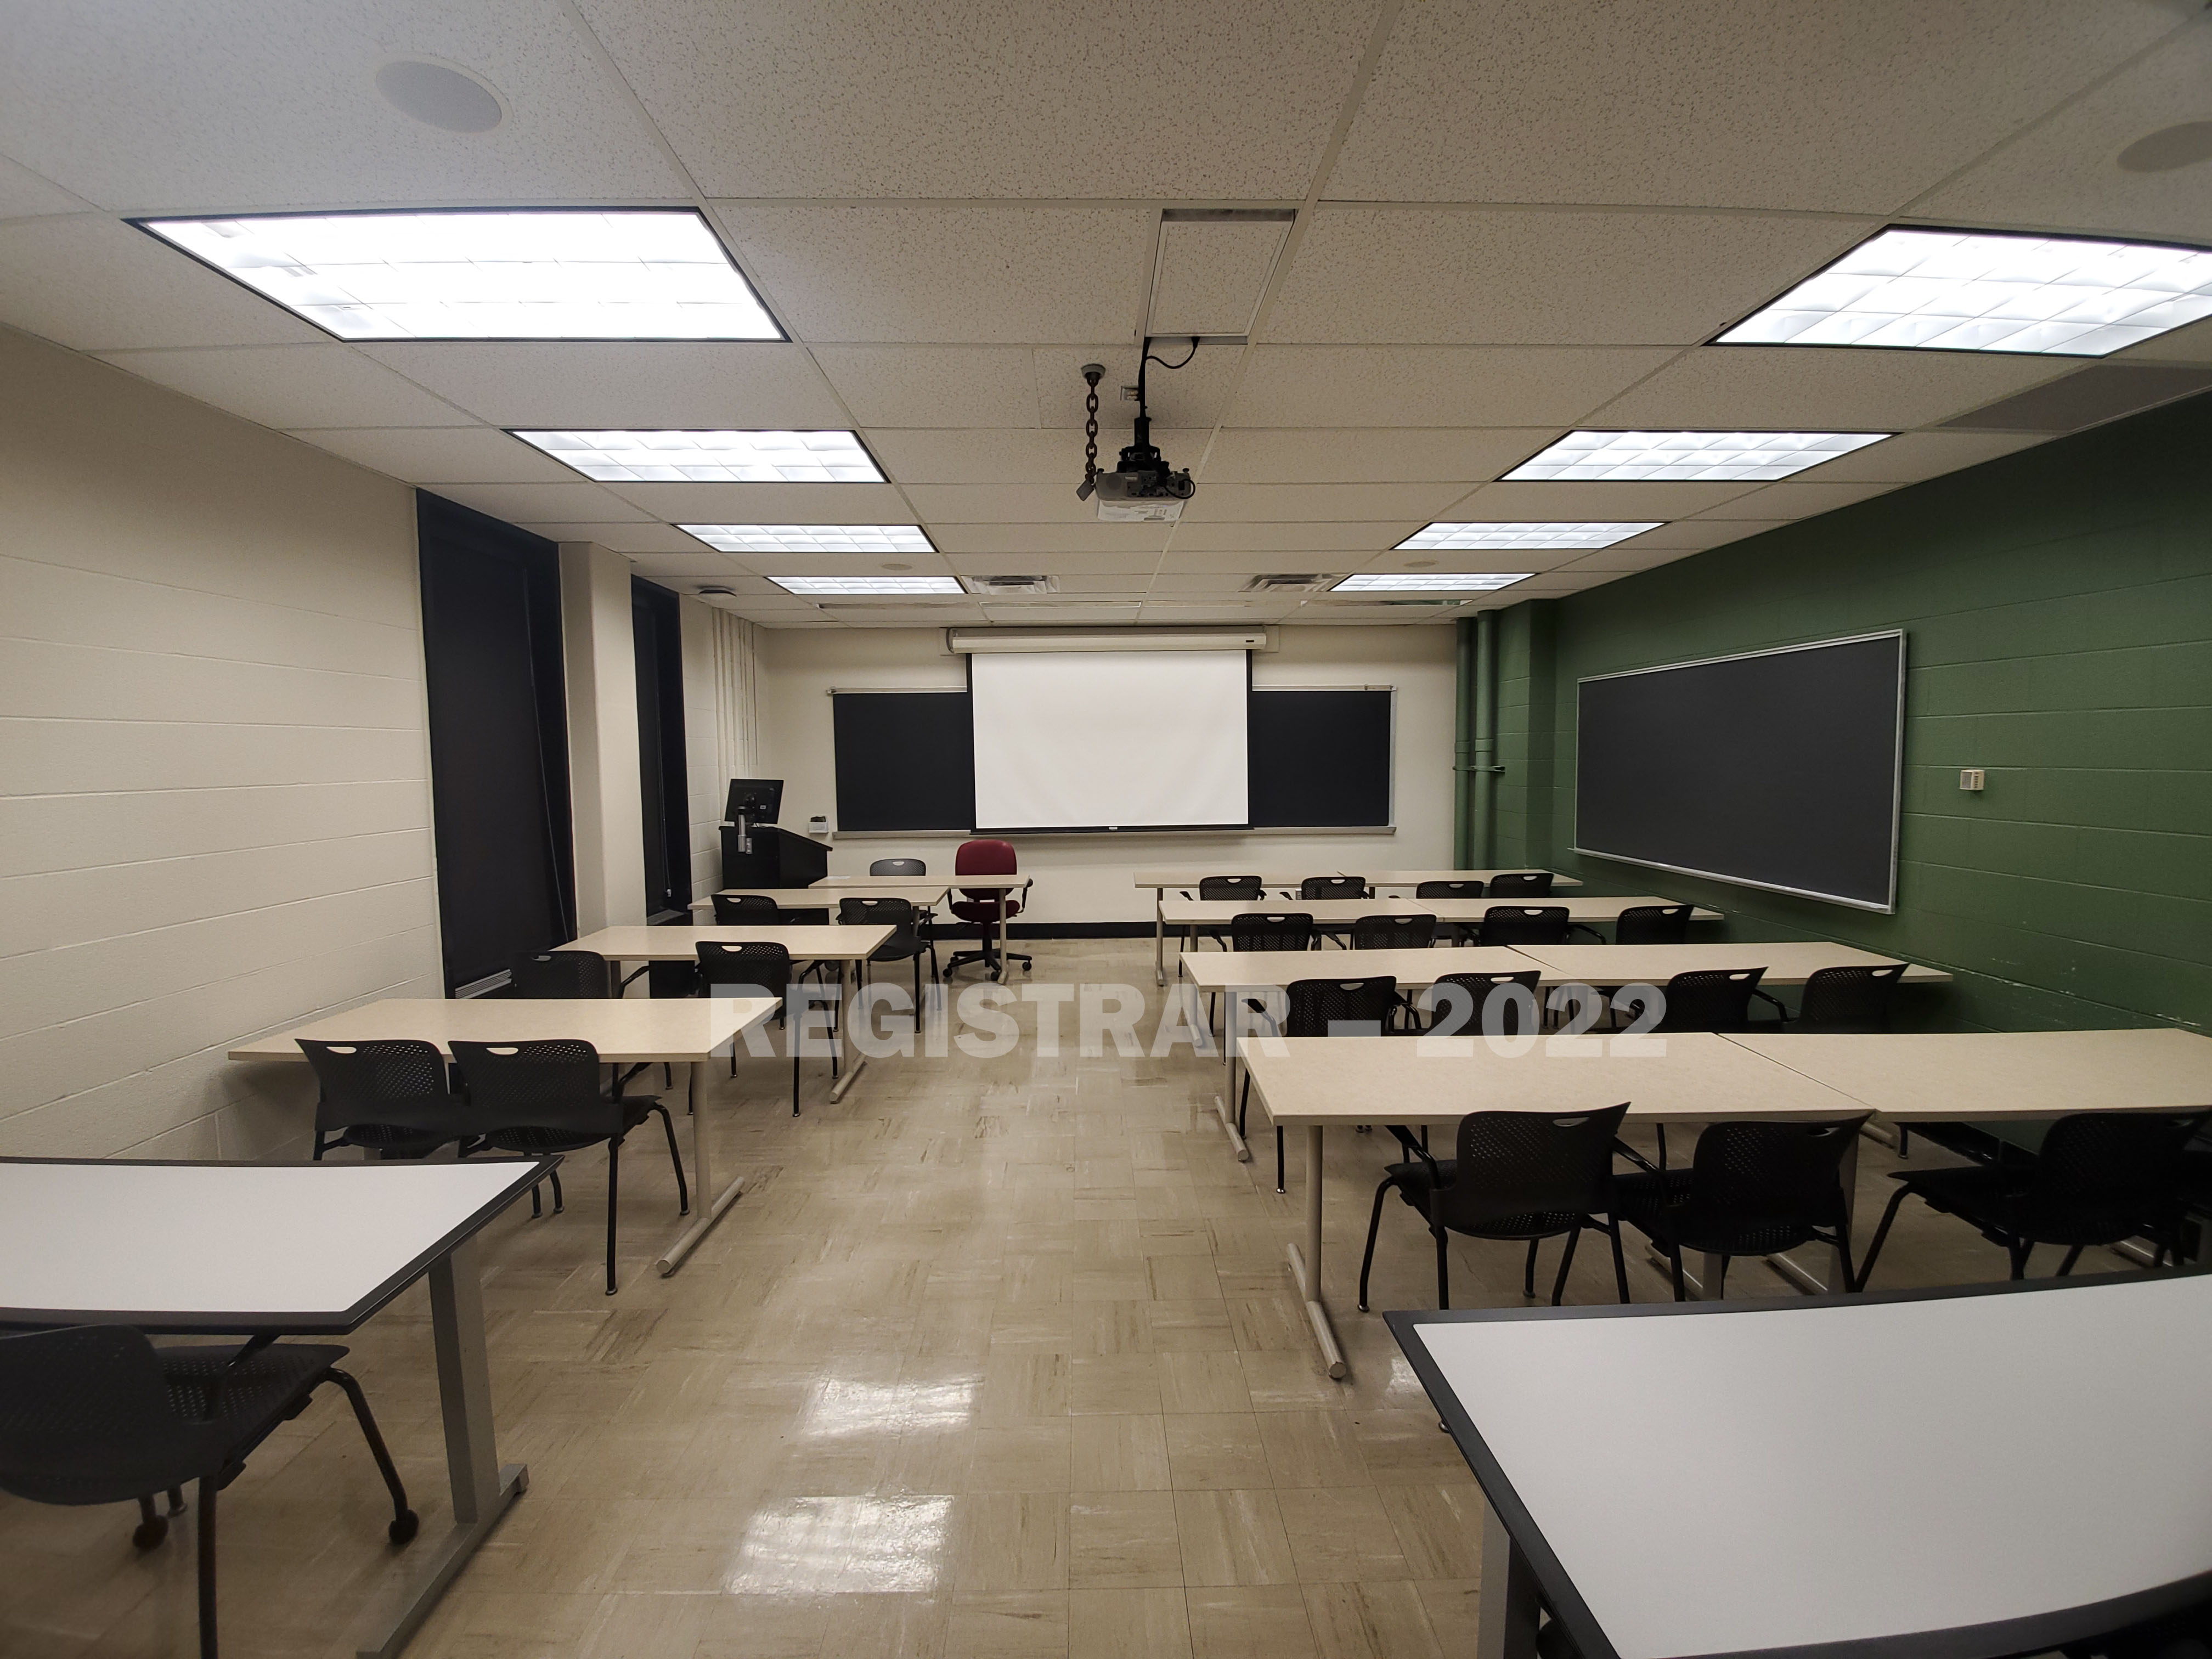 Baker Systems Engineering room 394 ultra wide angle view from the back of the room with projector screen down